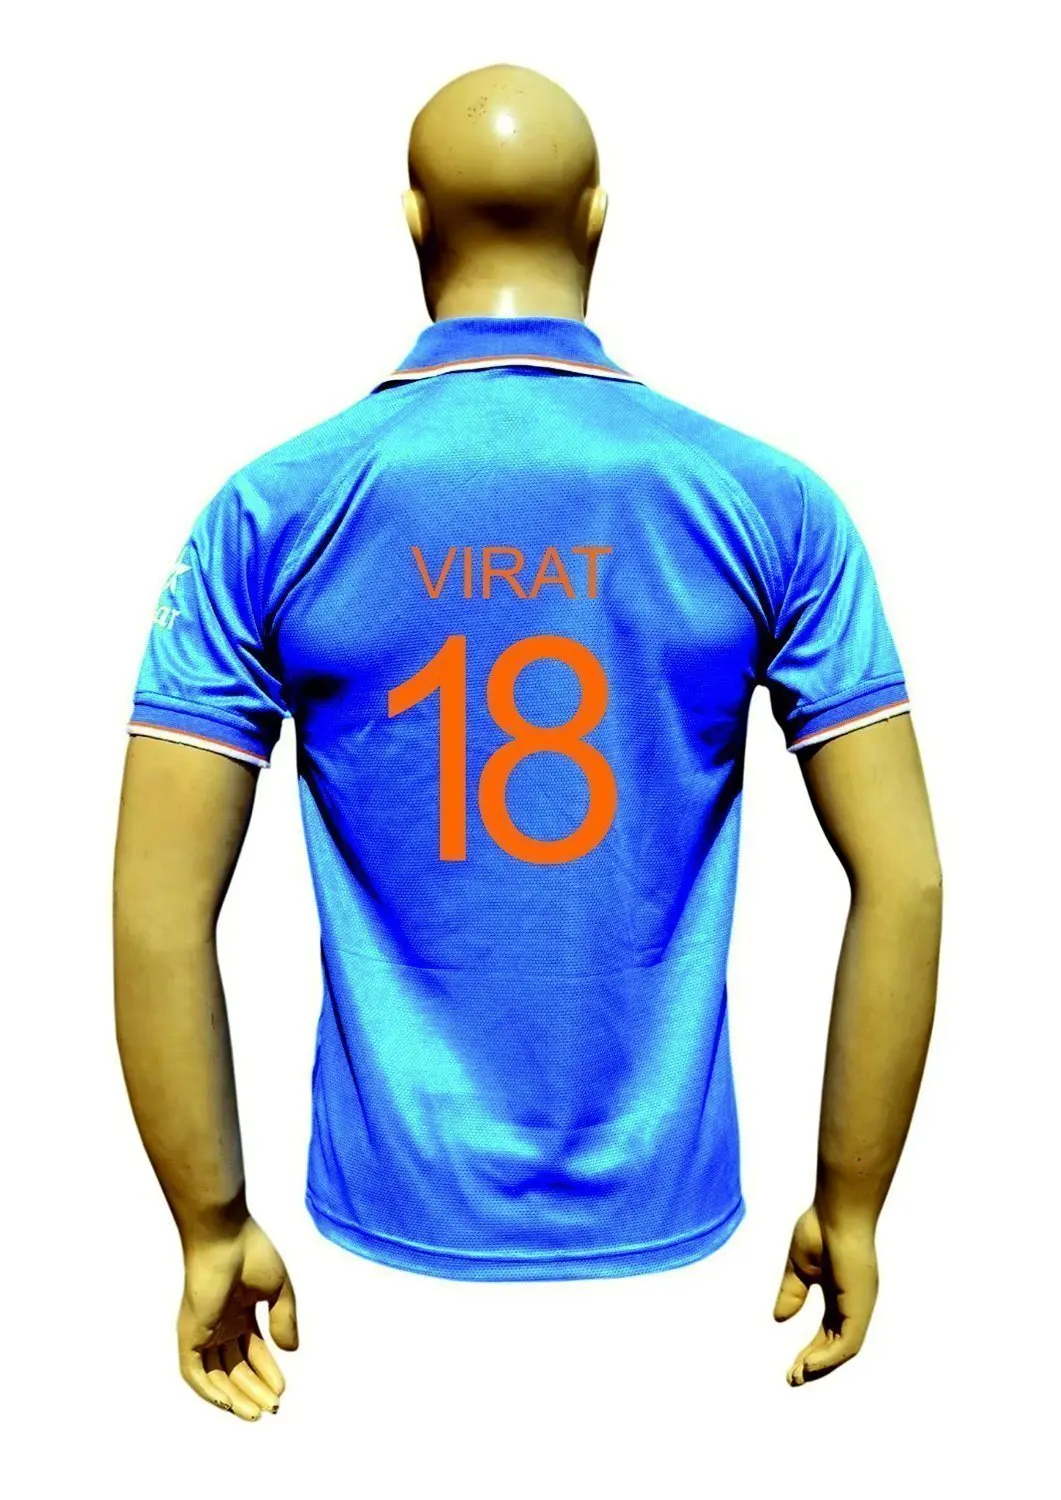 indian cricket jersey with my name